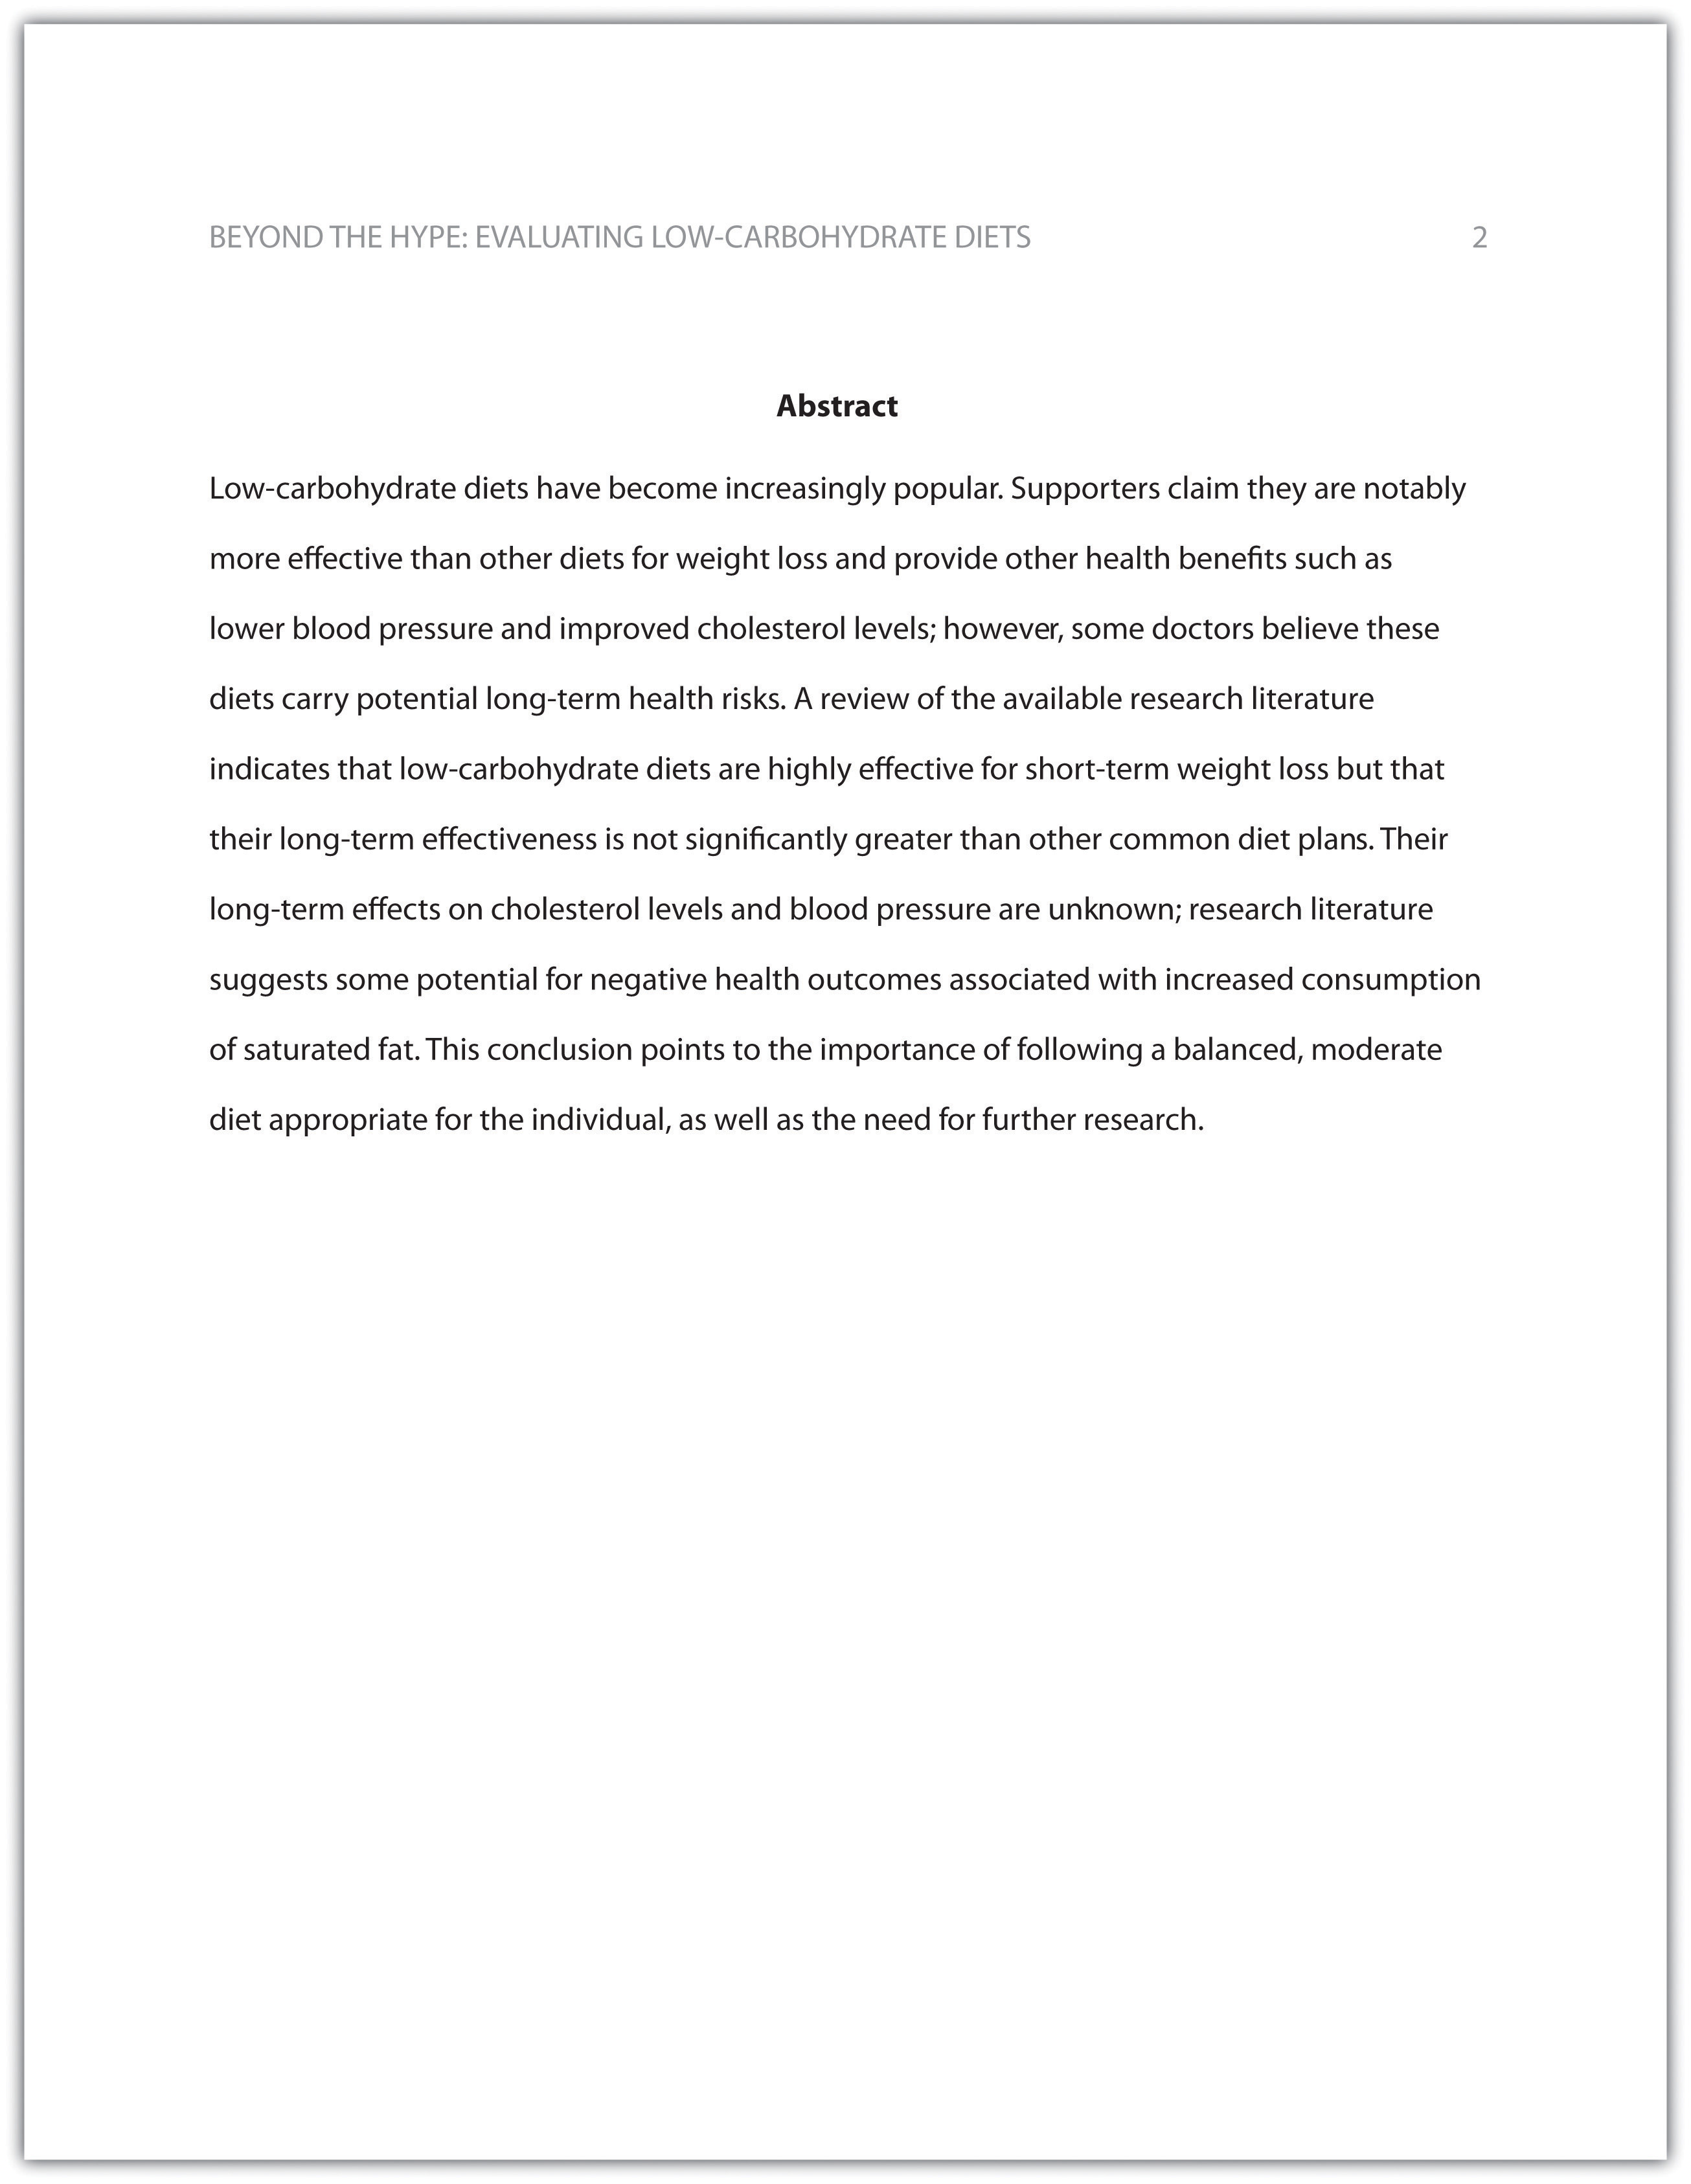 body language research paper